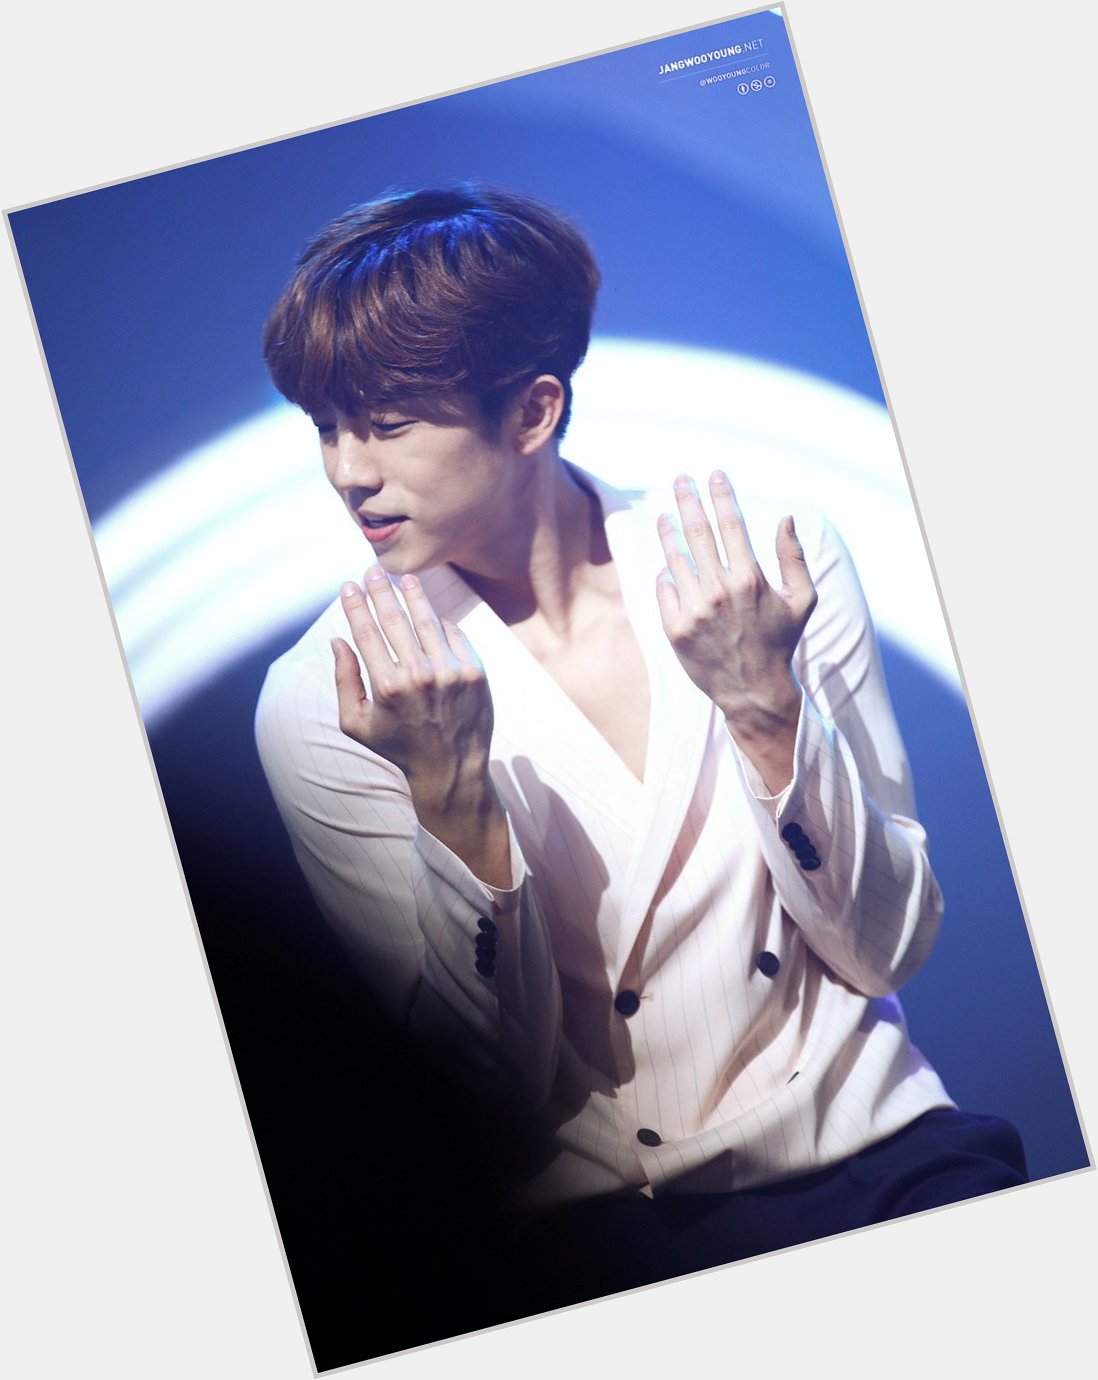 Happy birthday jang wooyoung !! your hands are beautiful as always       